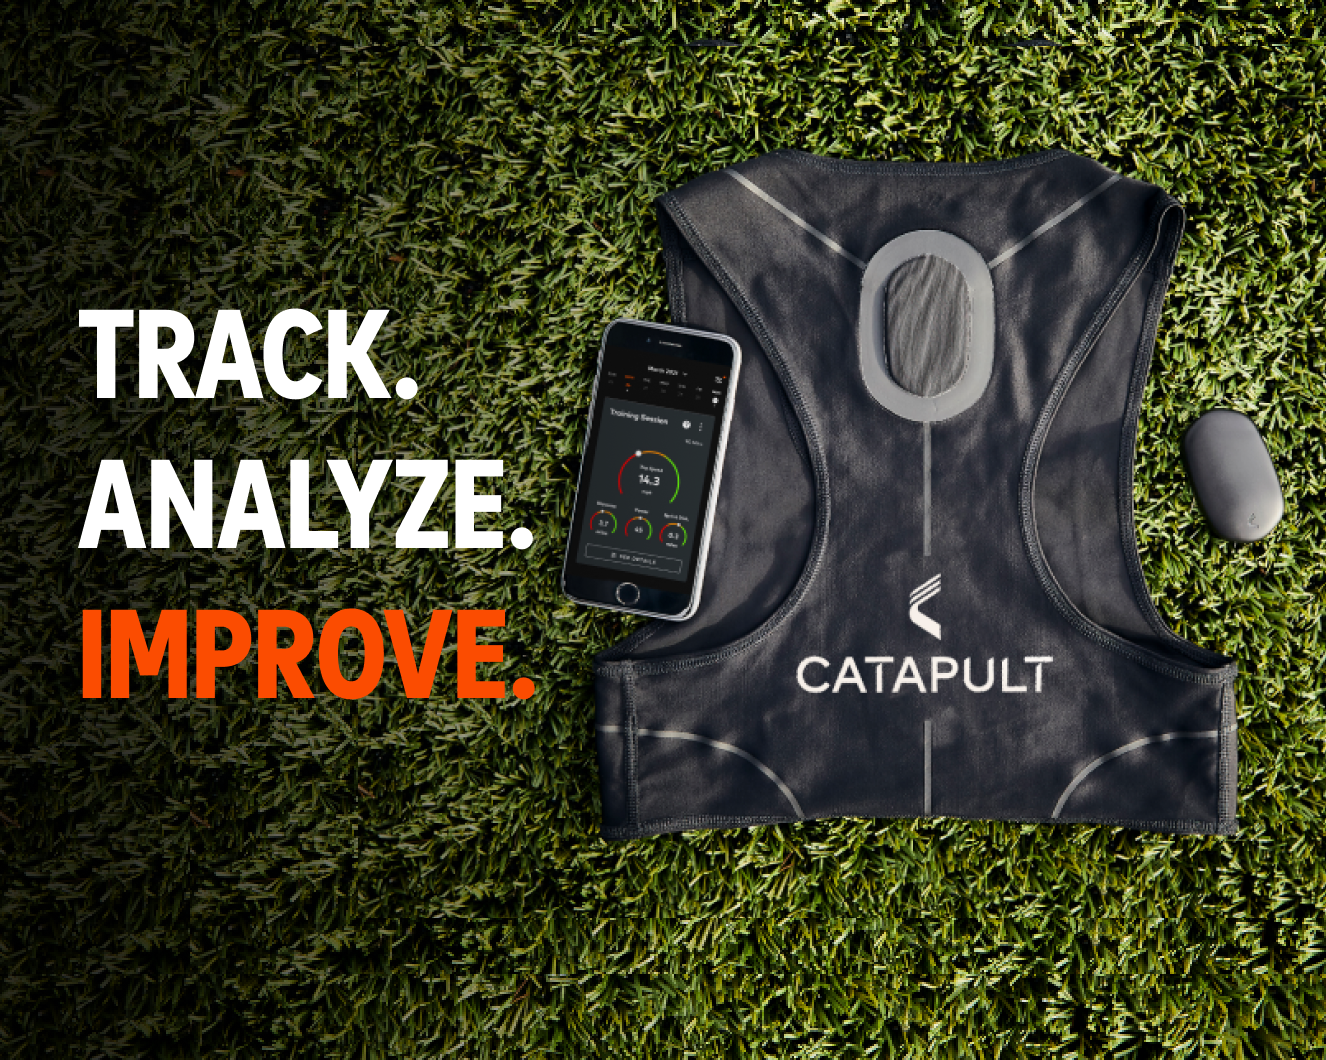 CATAPULT ONE - Track, Analyze, and Improve Your Soccer Performance  (Pre-Paid Membership) in Canada